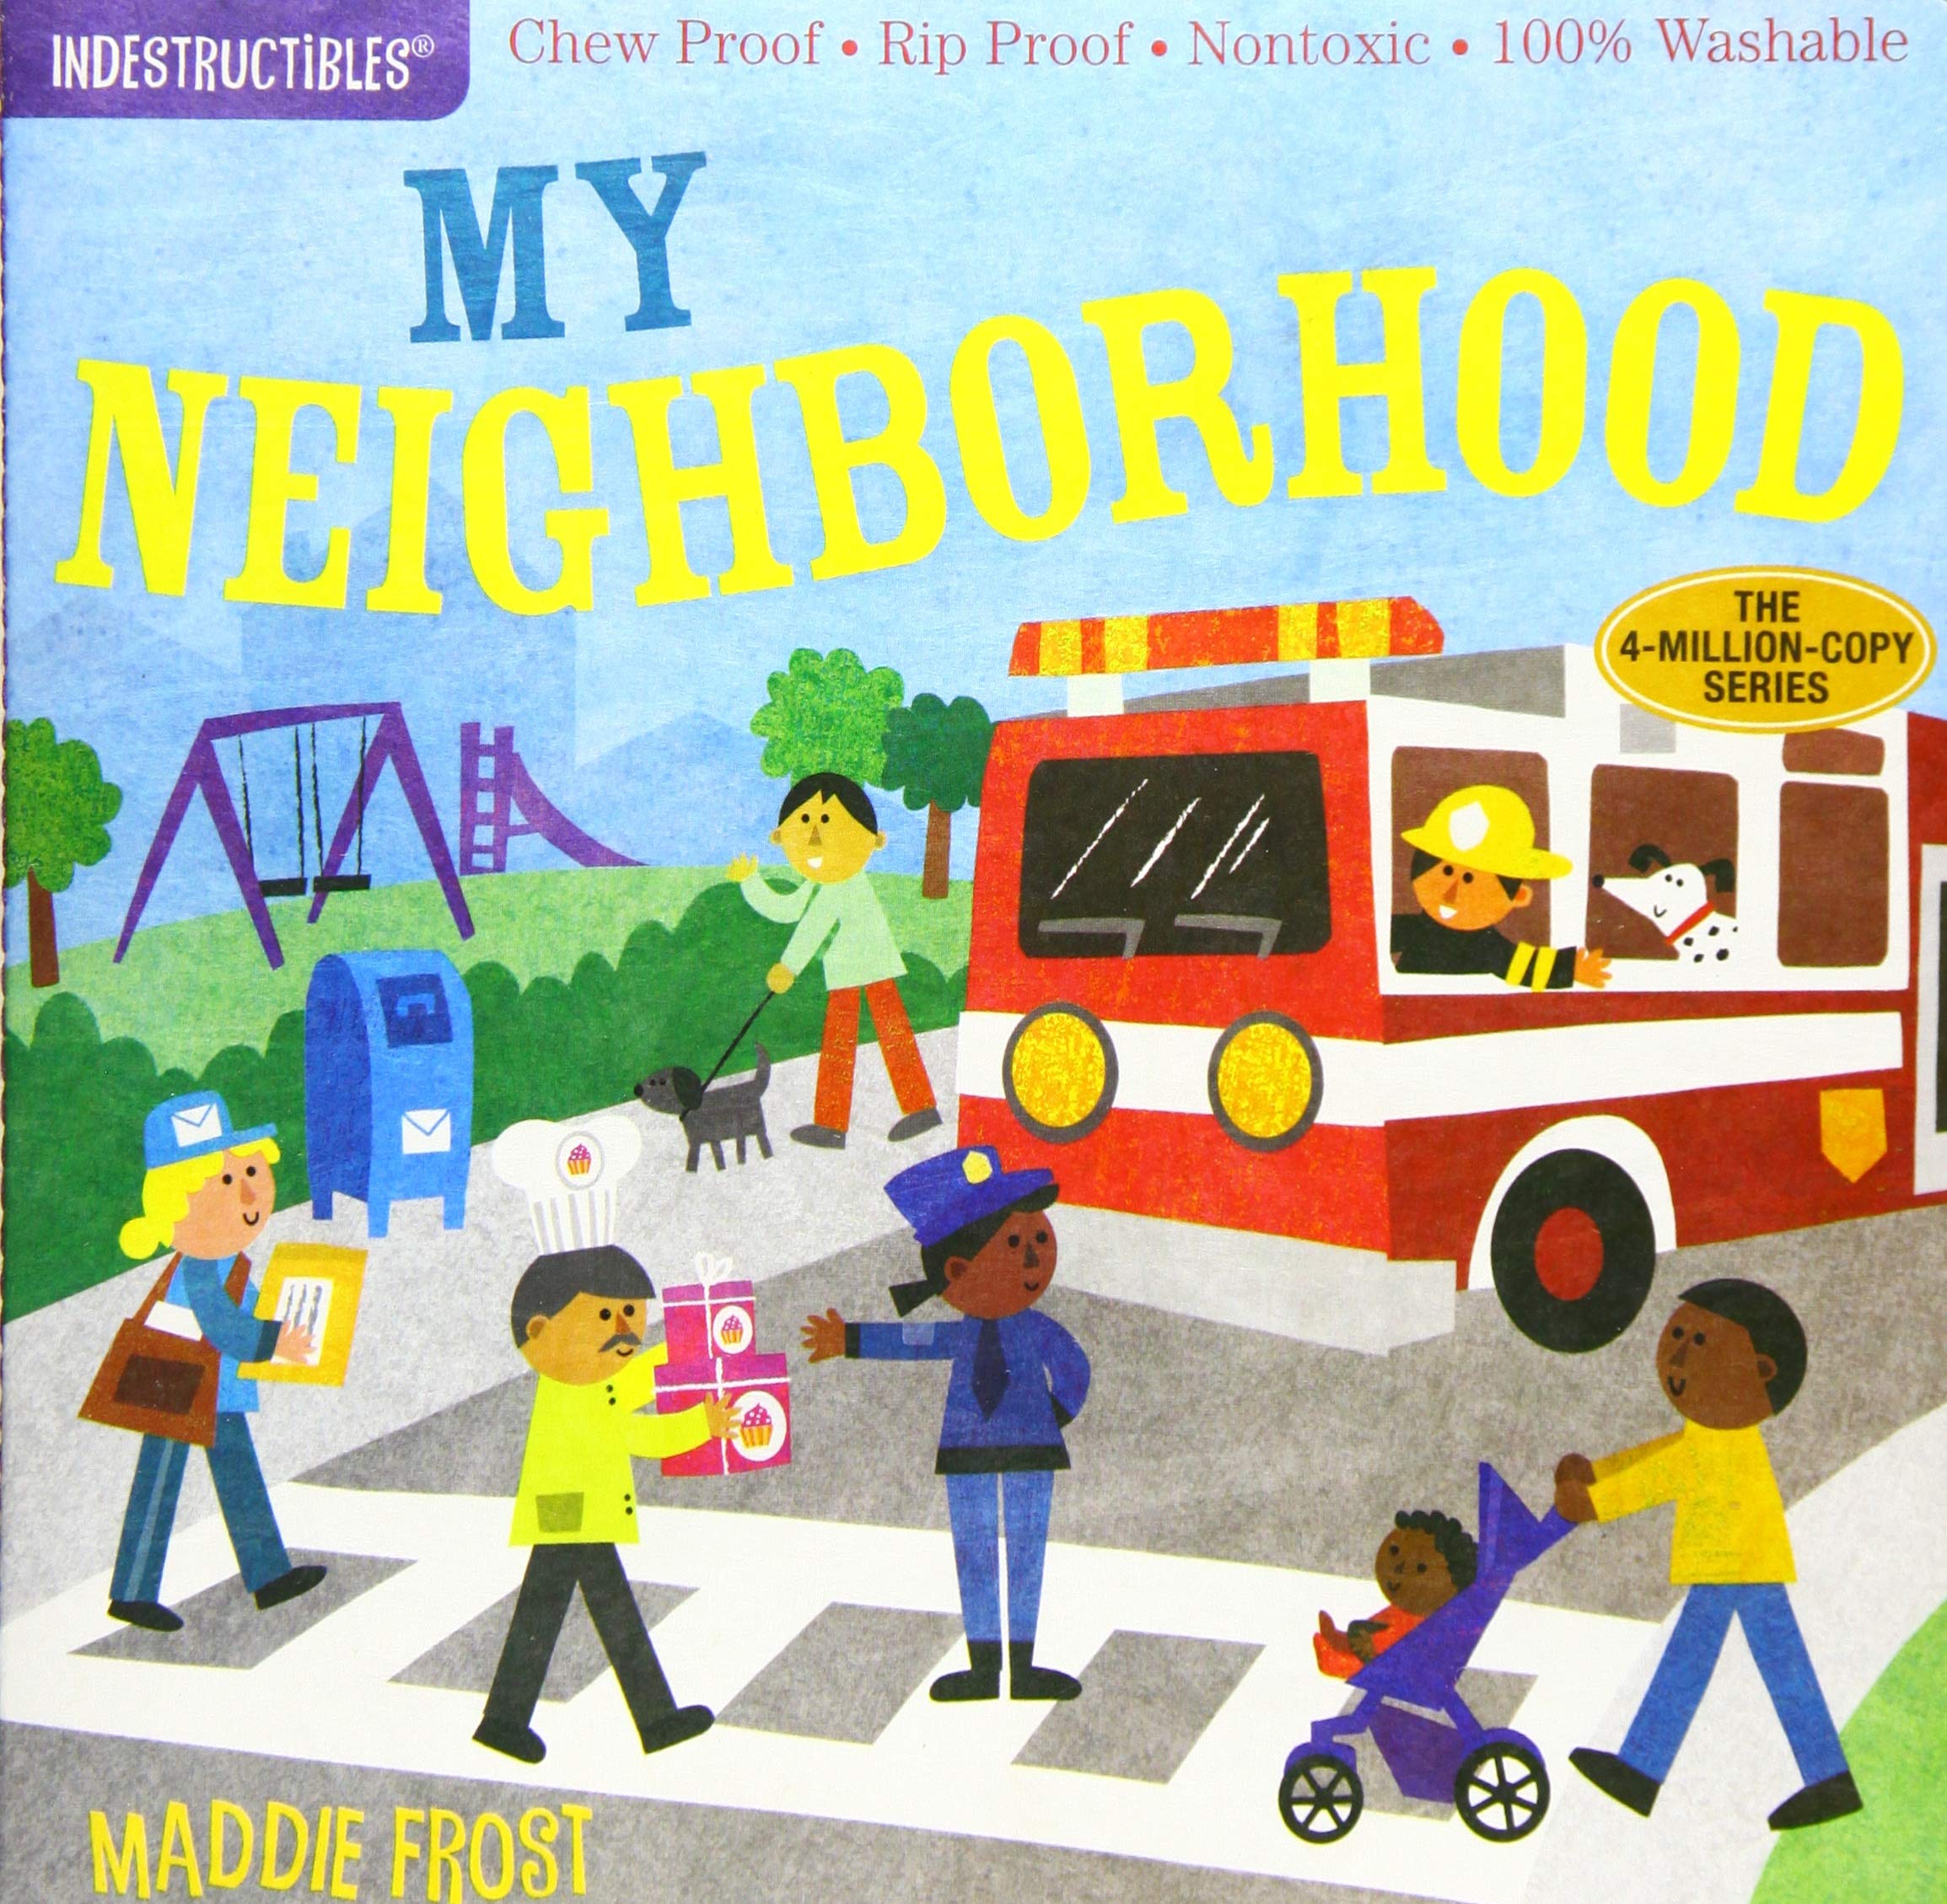 View Indestructibles: My Neighborhood by Maddie Frost